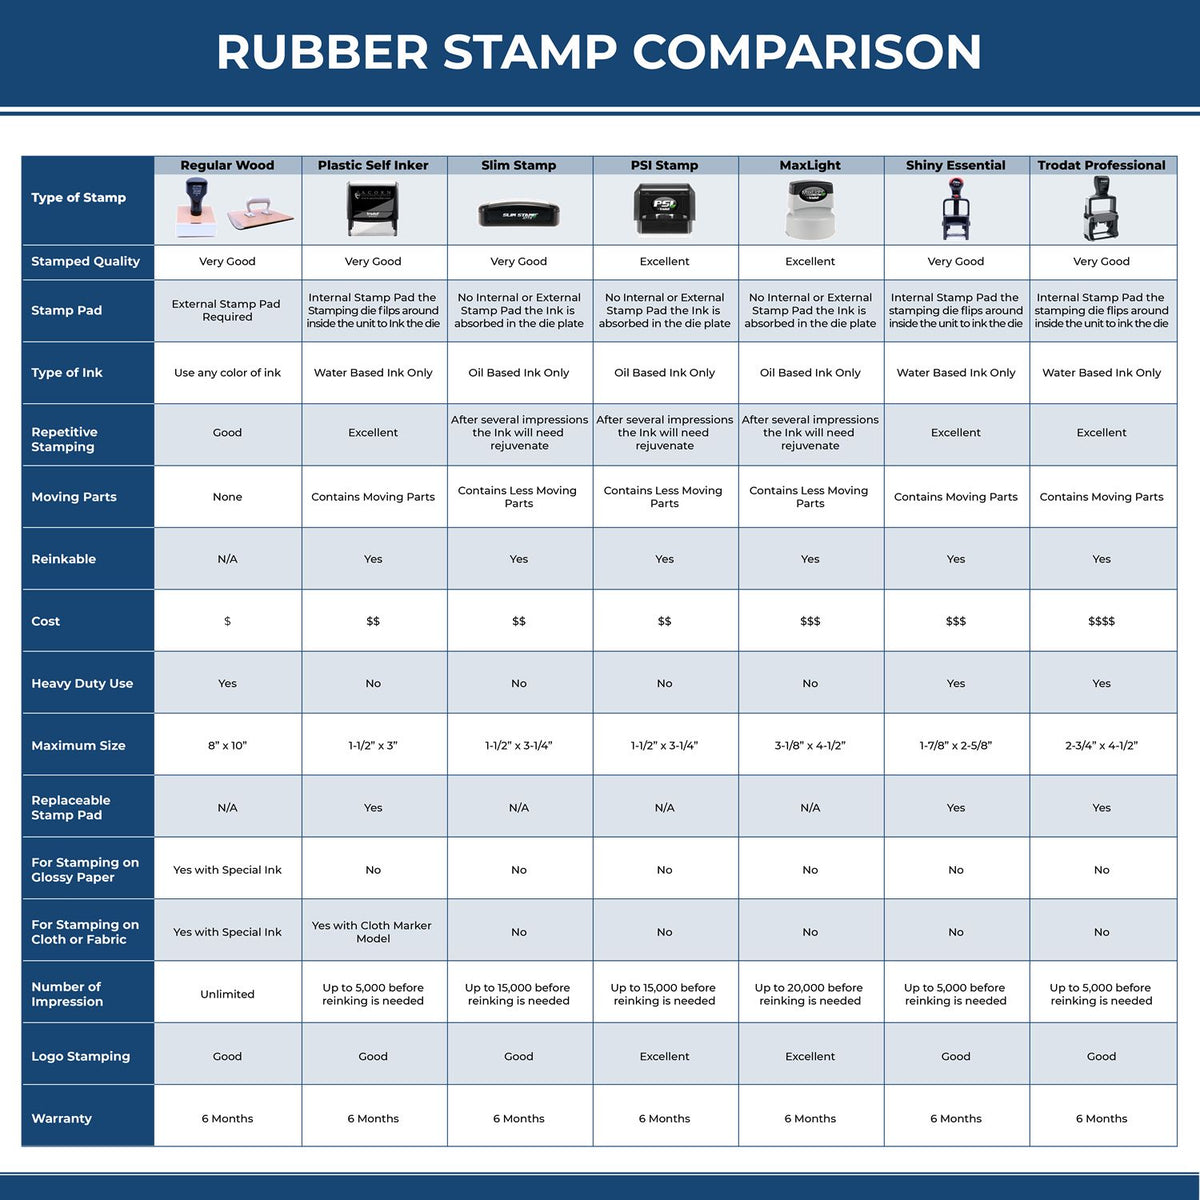 A comparison chart for the different types of mount models available for the MaxLight Premium Pre-Inked Washington Rectangular Notarial Stamp.